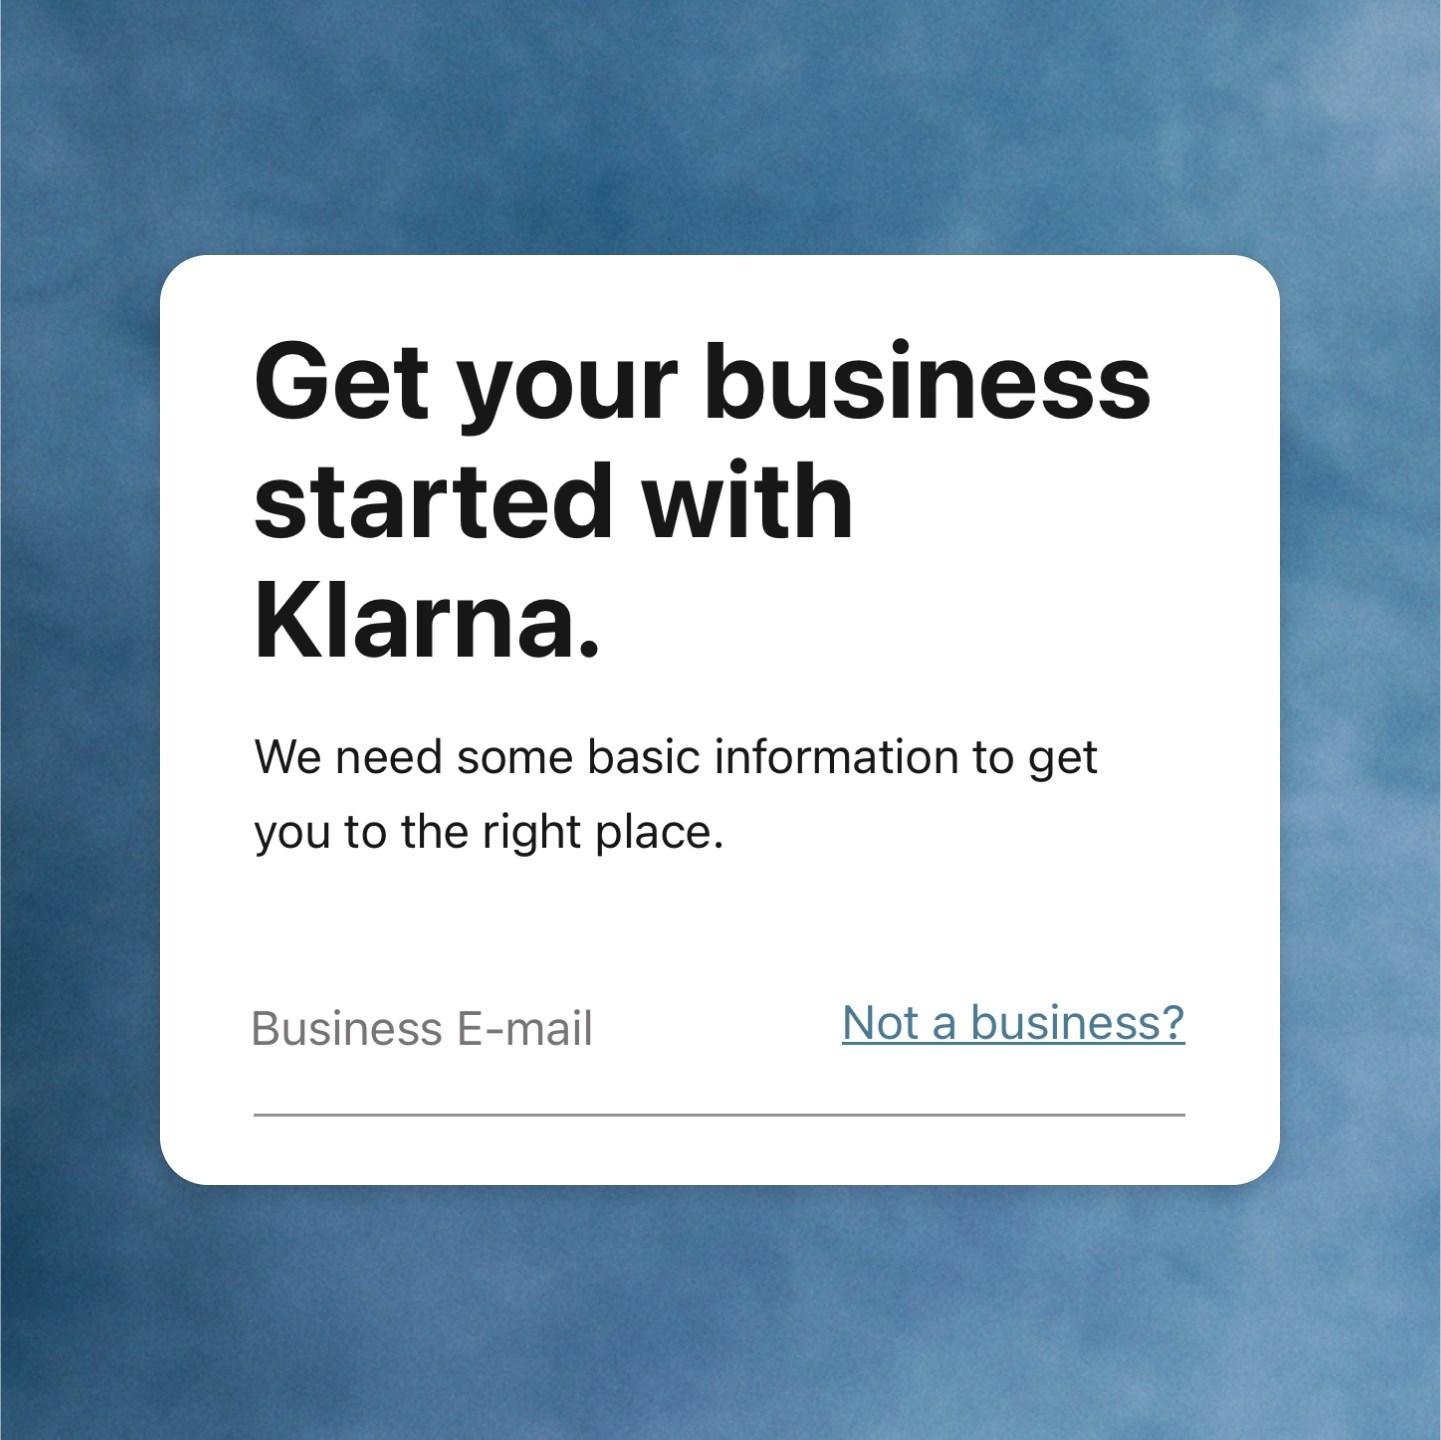 Get your business started with Klarna